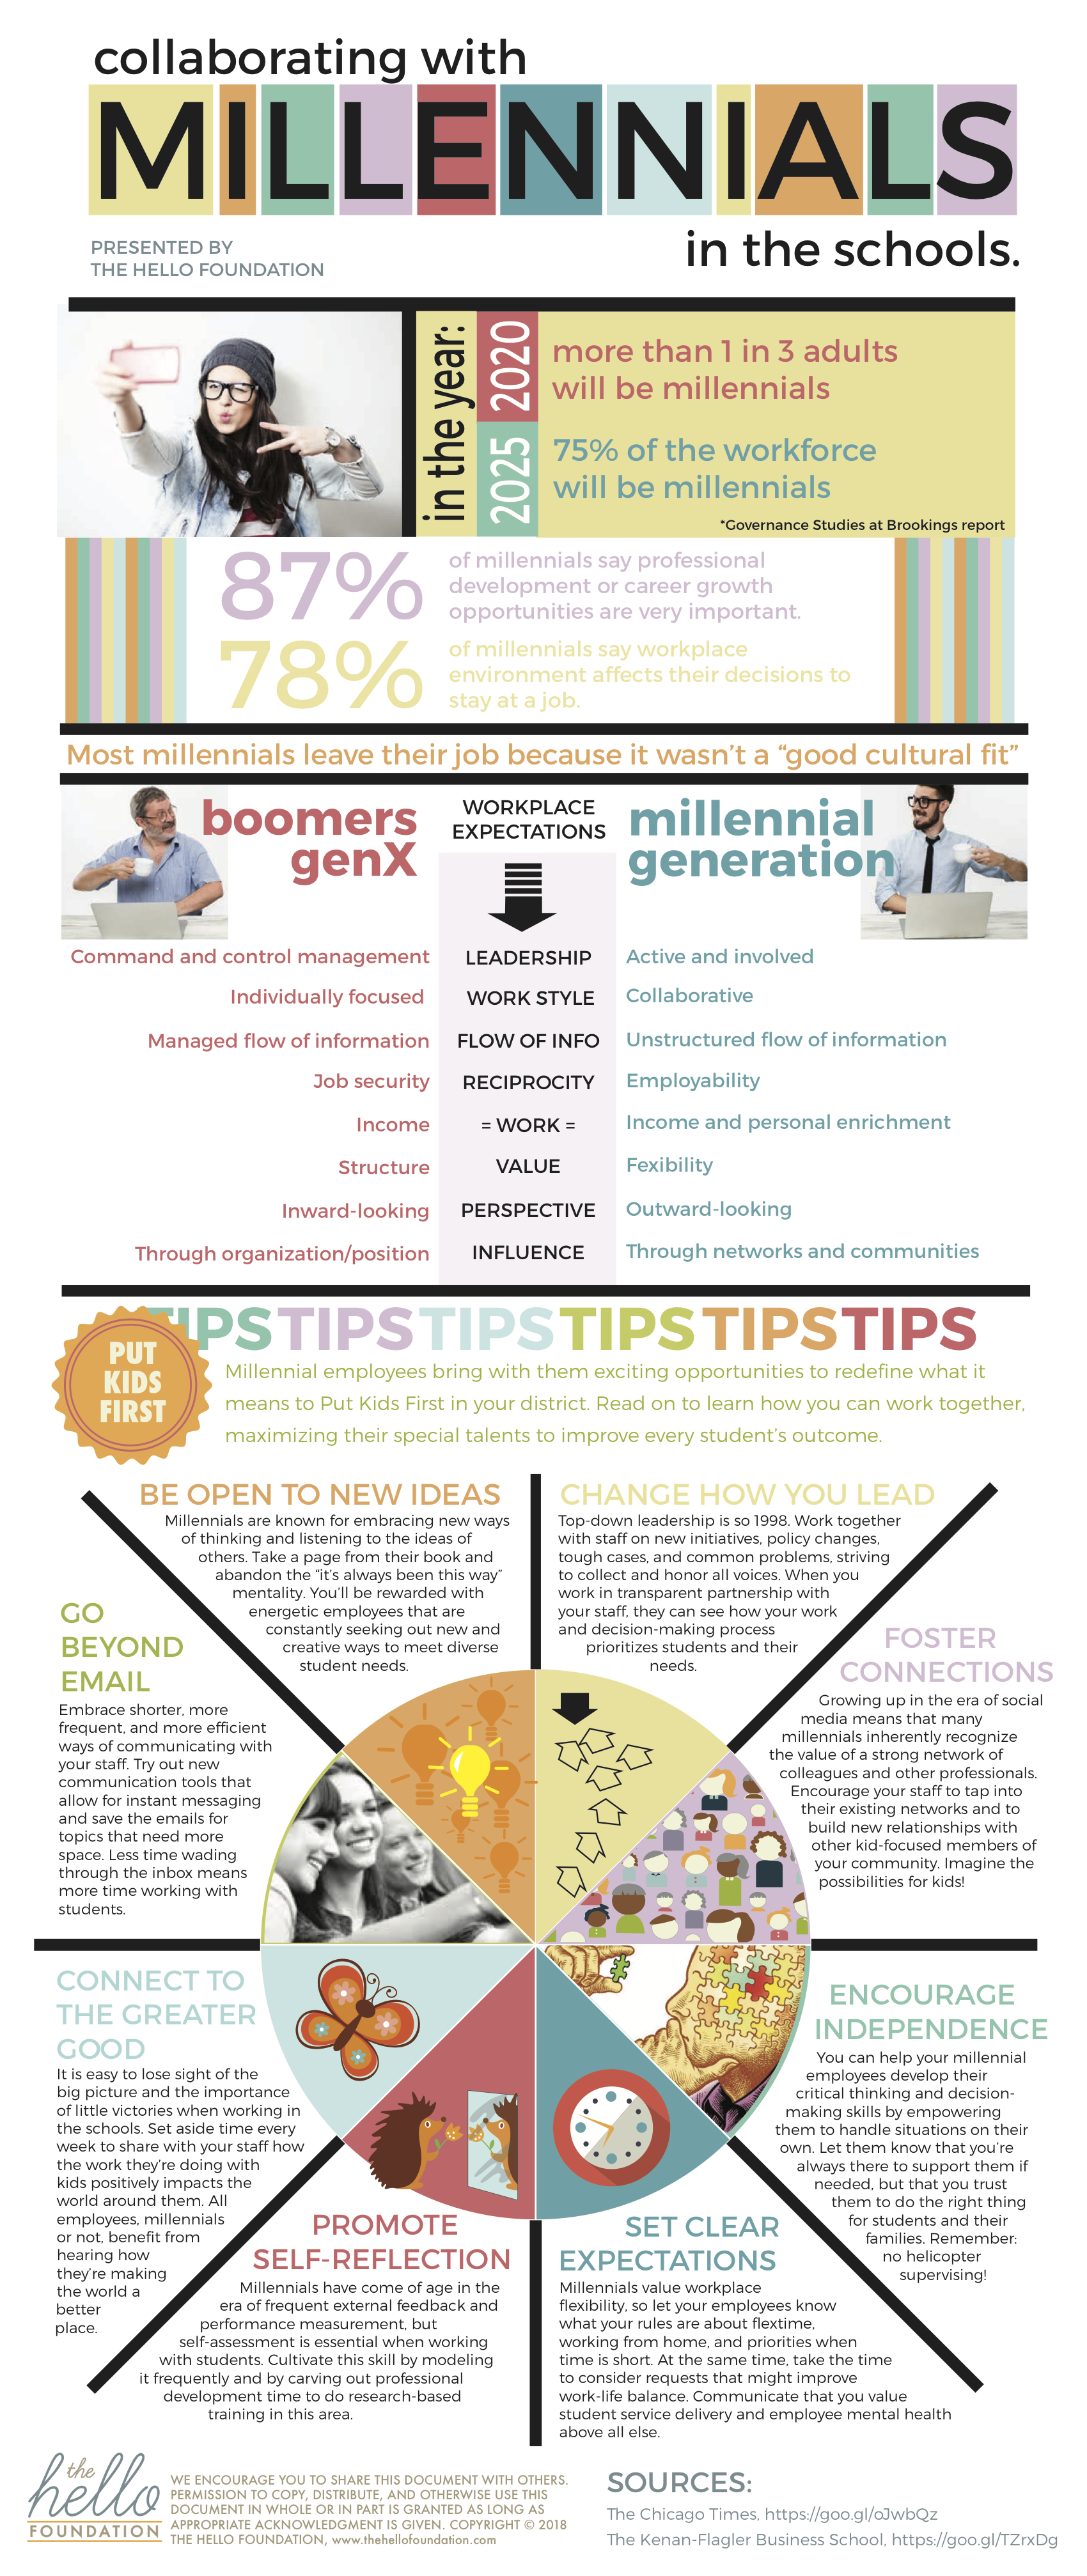 Collaborating with Millennials in the schools infographic